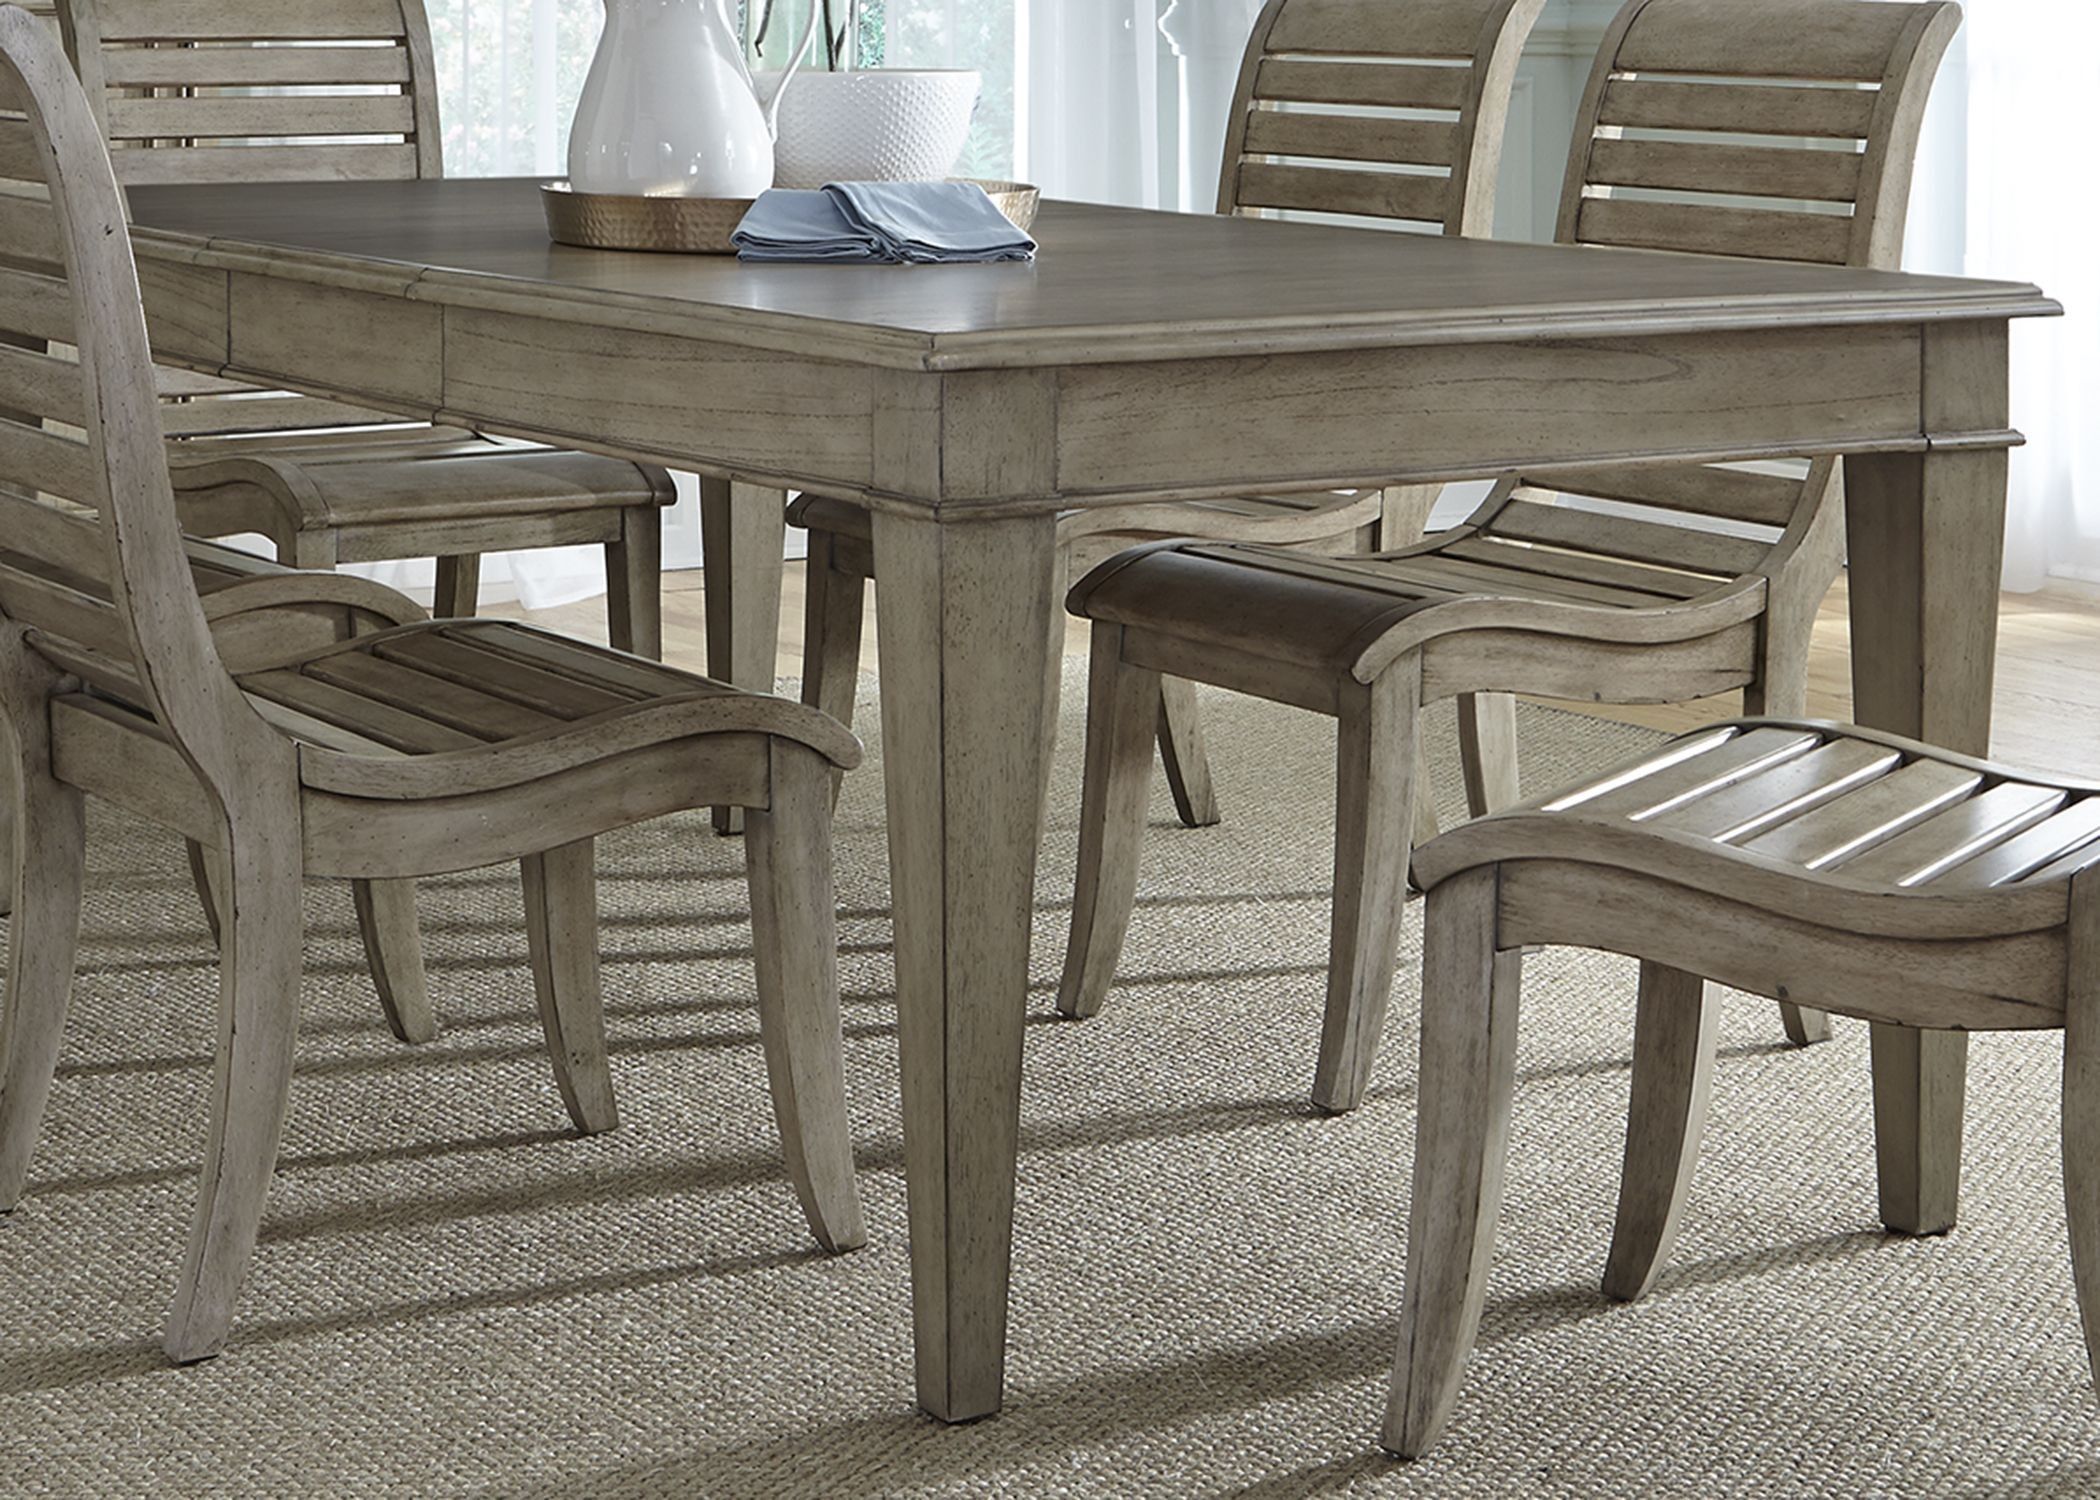 Grayton Grove Driftwood Extendable Rectangular Leg Dining Within Recent Natural Rectangle Dining Tables (View 15 of 15)